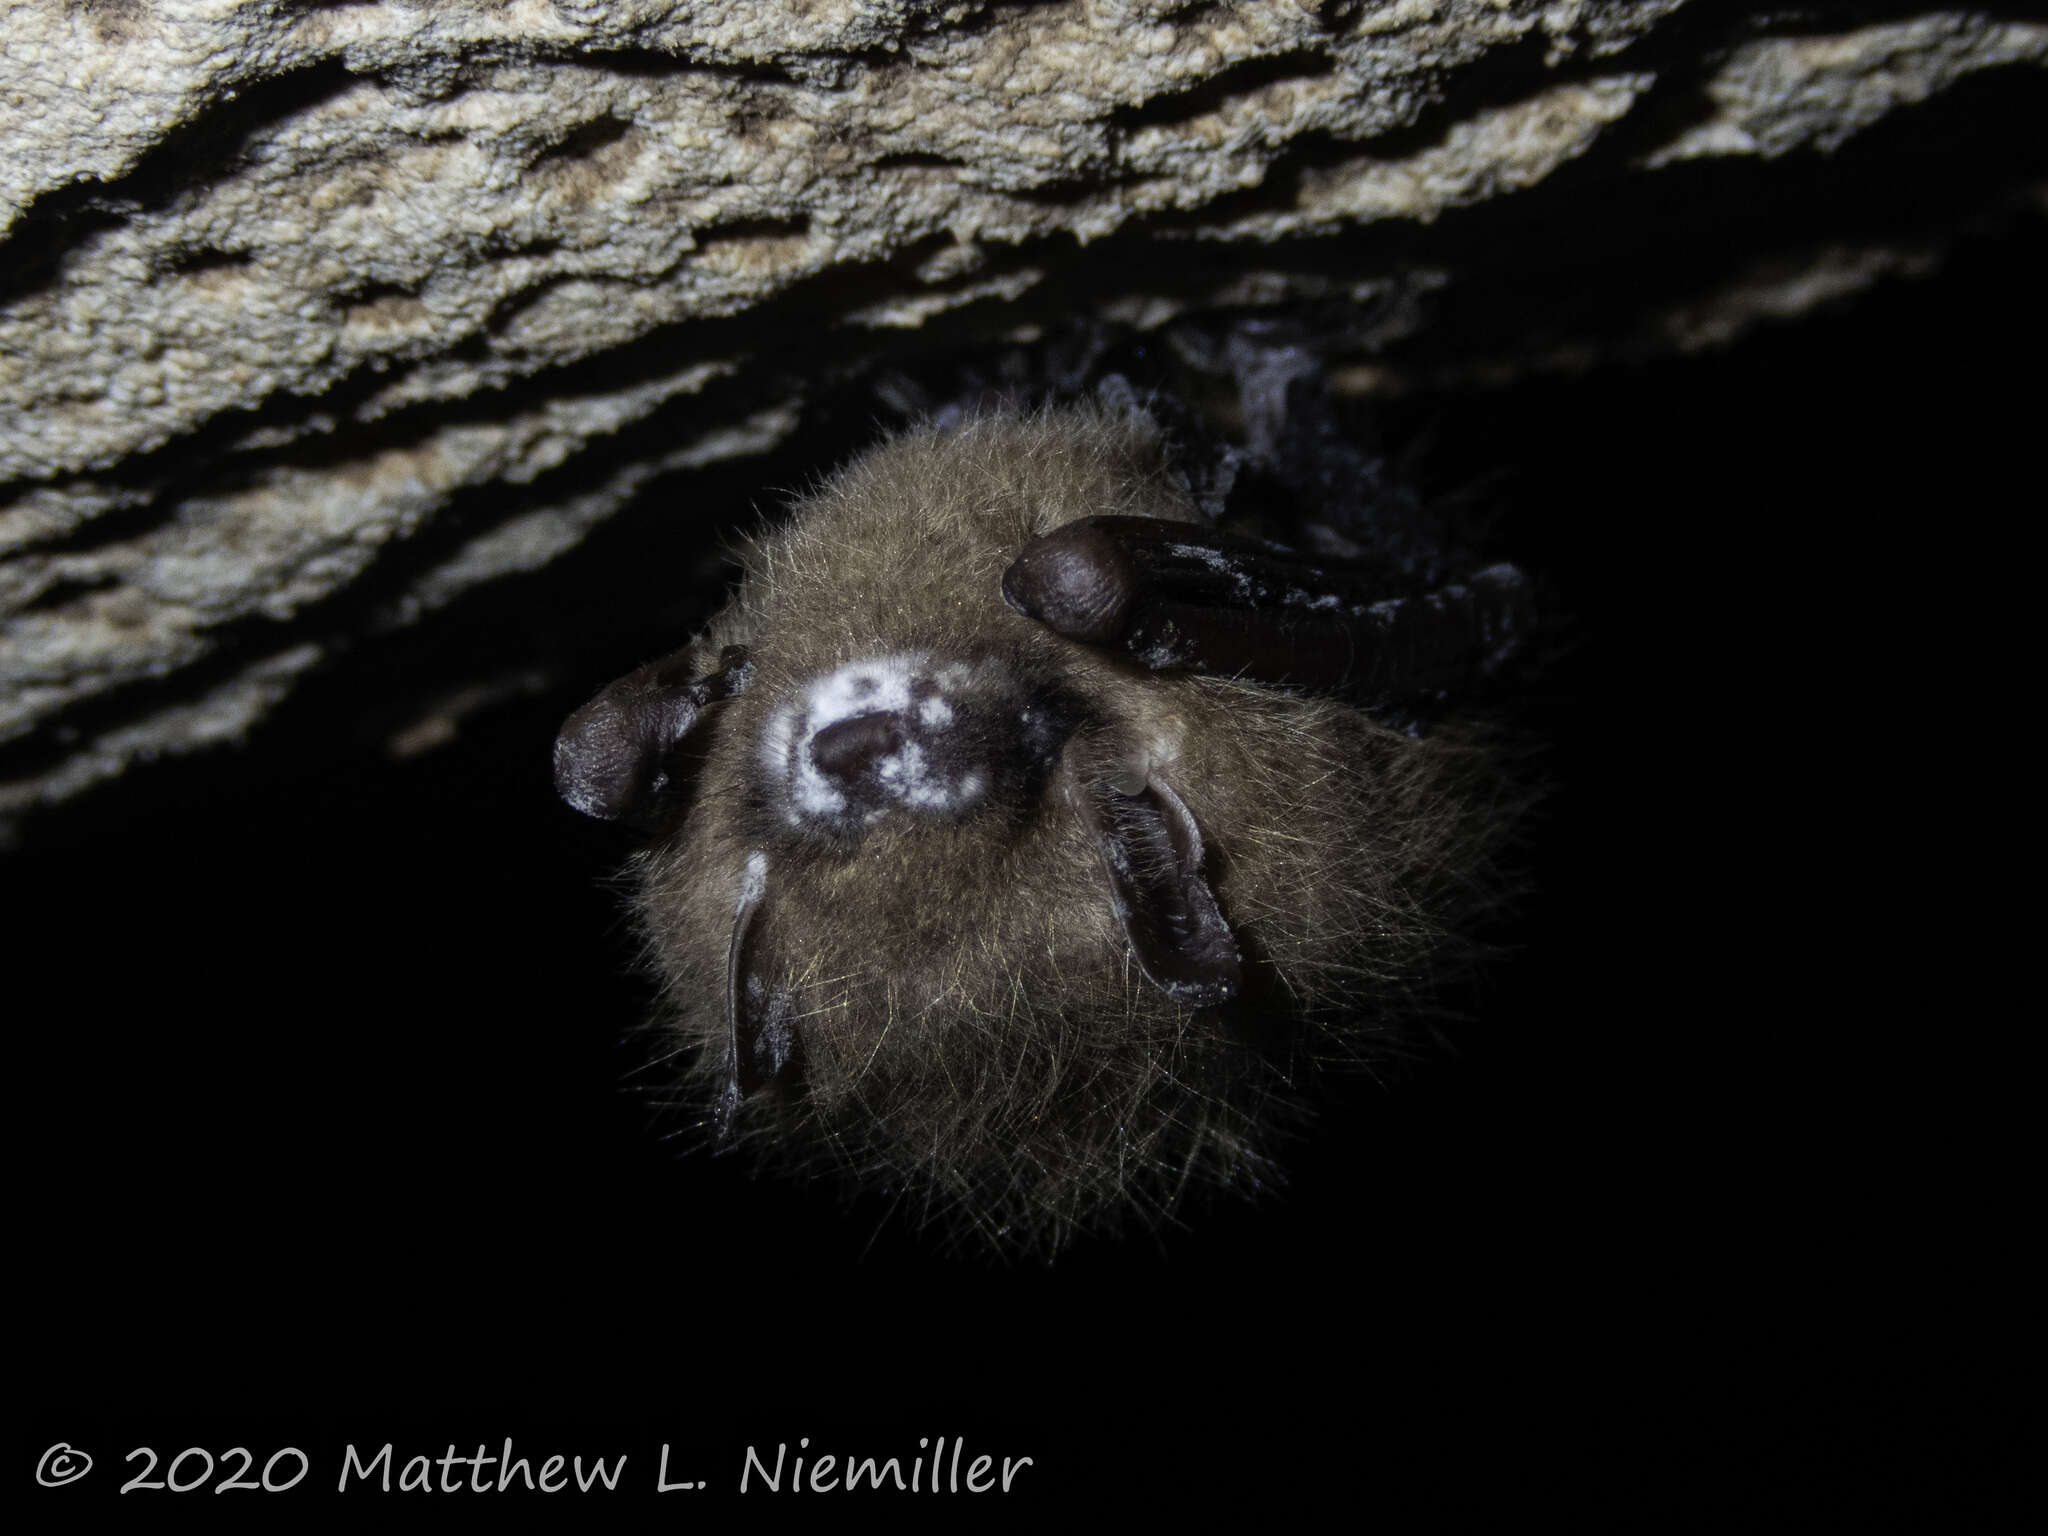 Image of White nose syndrome